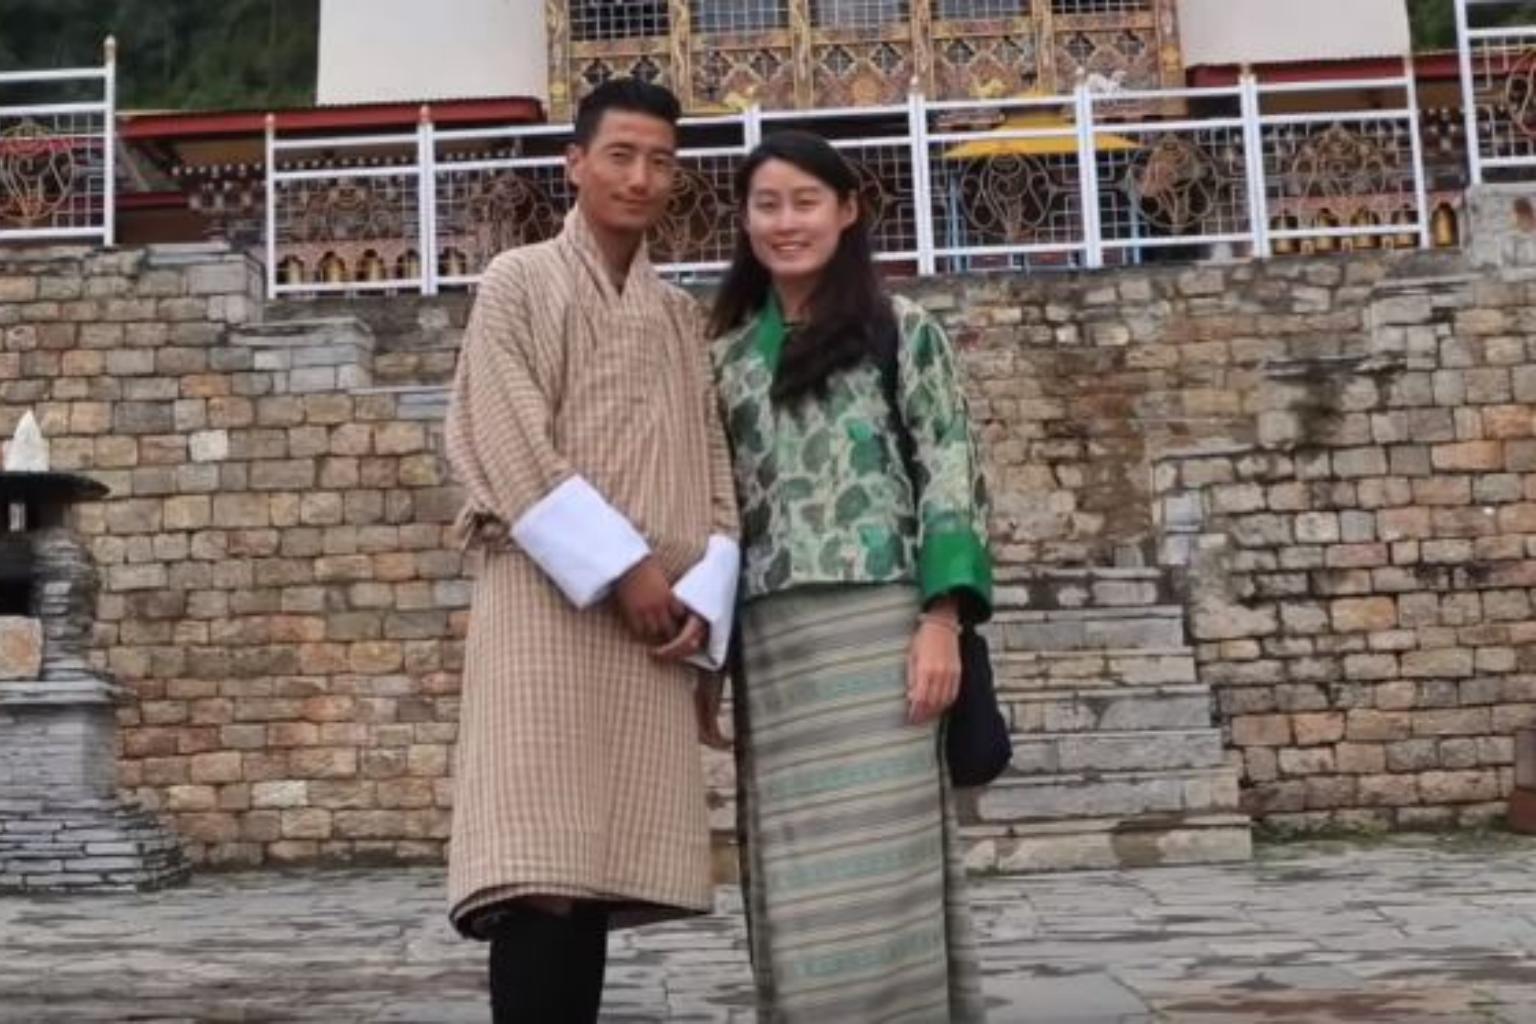 i-went-to-bhutan-on-a-holiday-and-ended-up-marrying-my-guide-the-straits-times.jpg